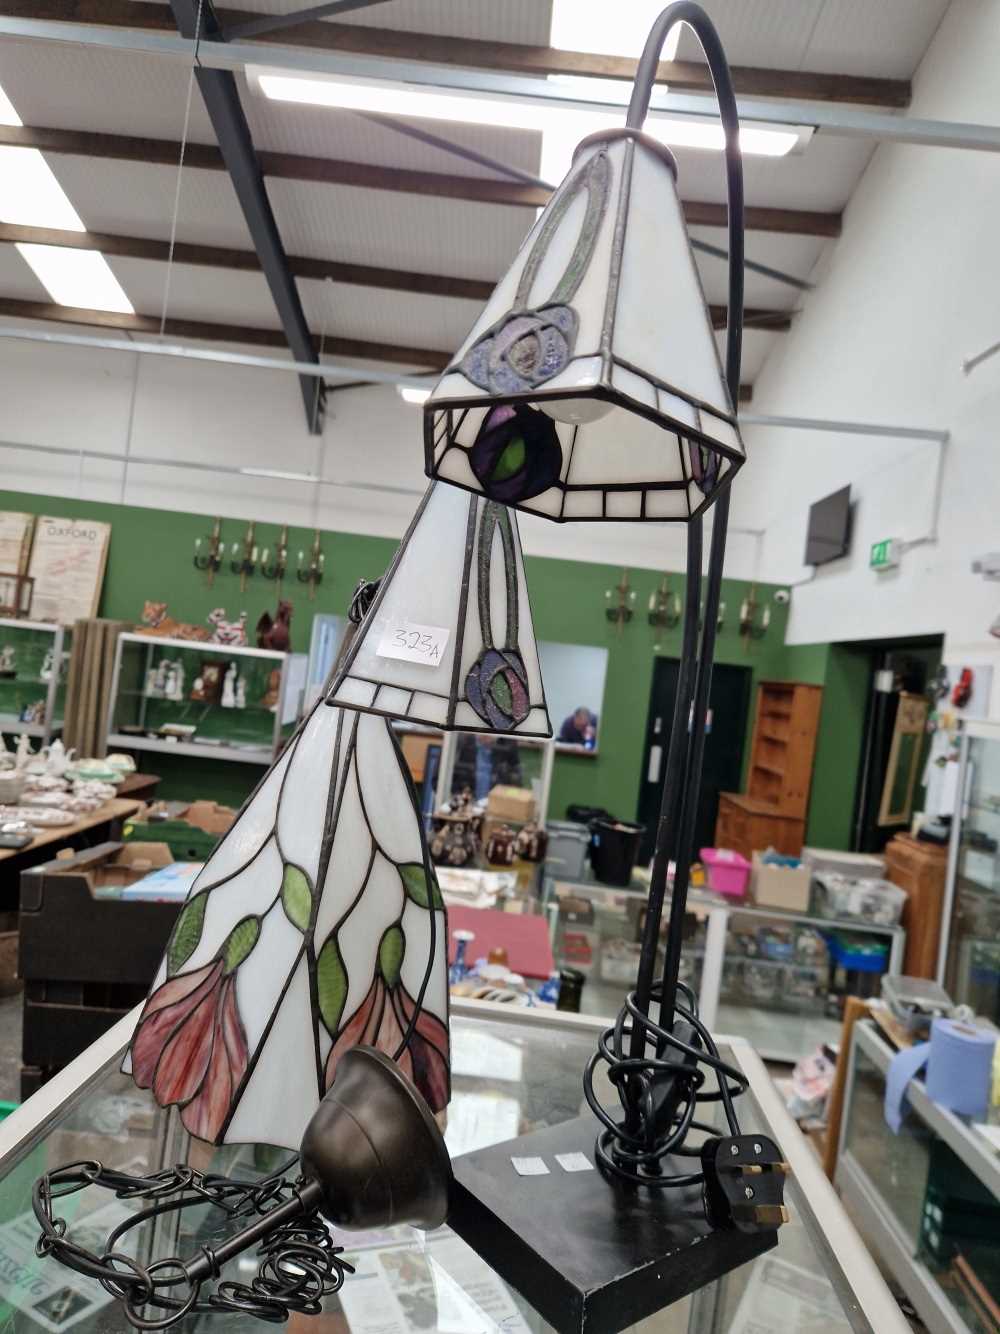 A table lamp with two leaded glass shades together with a similar ceiling light